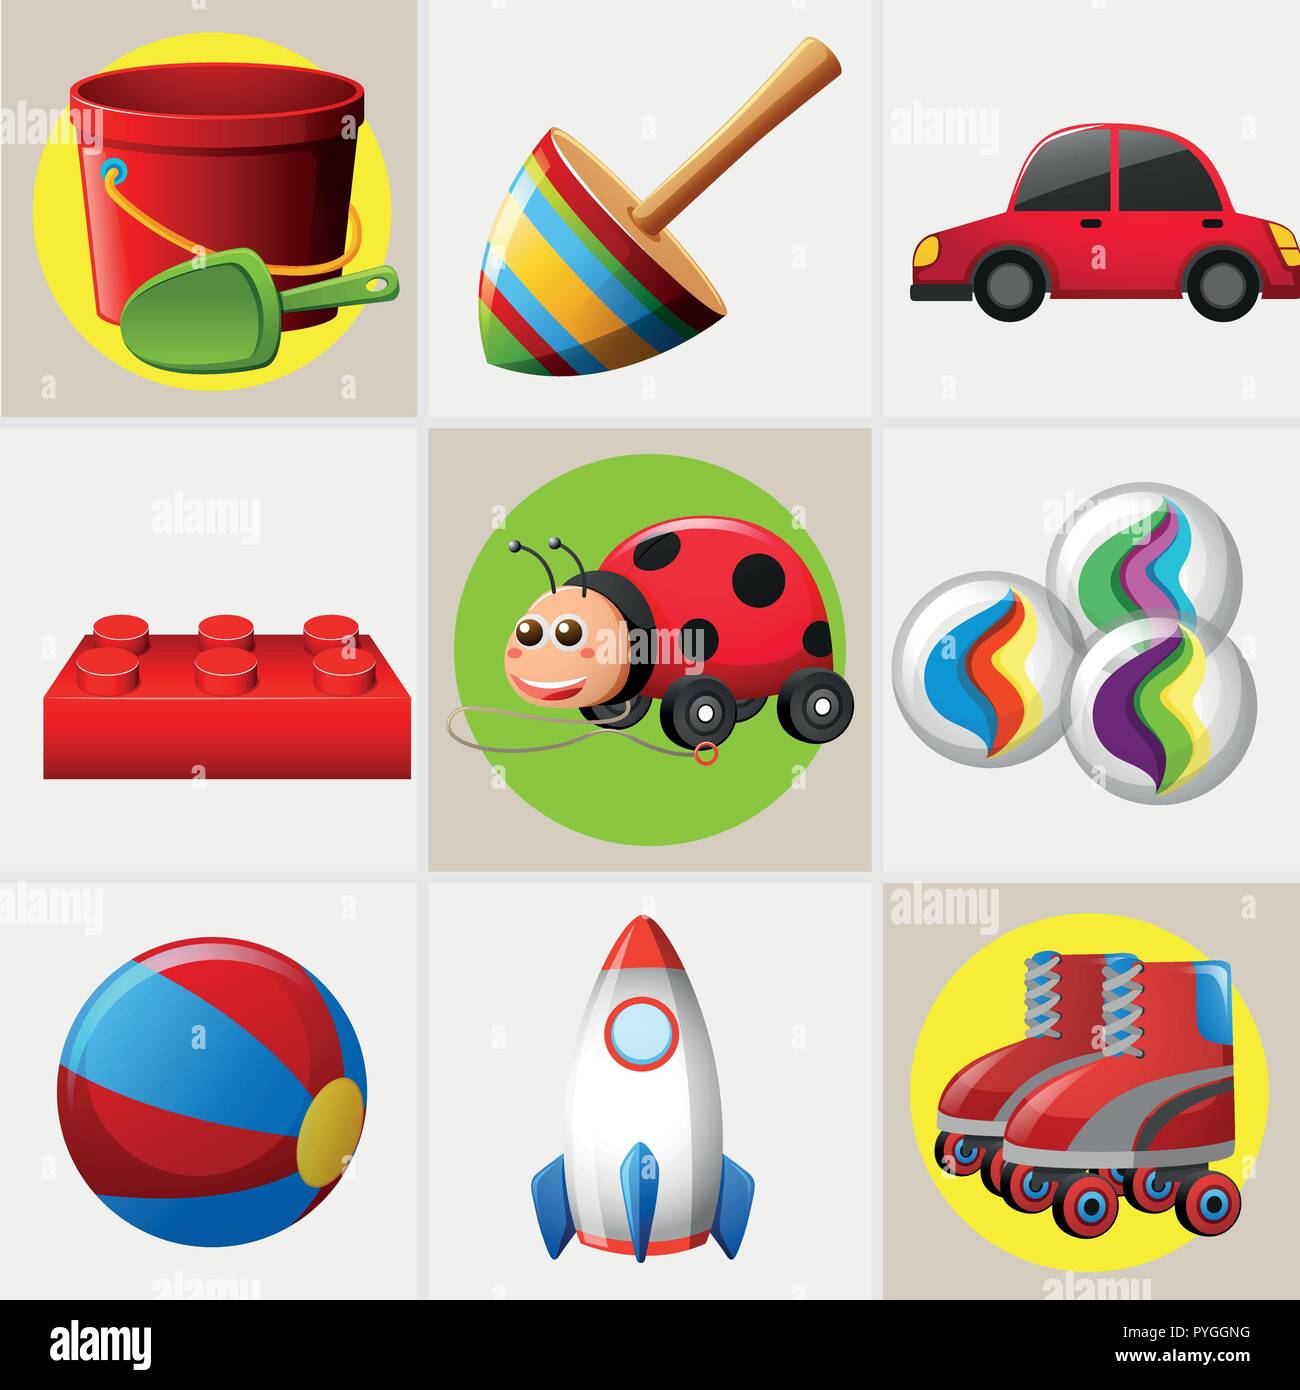 Different designs of toys illustration Stock Vector